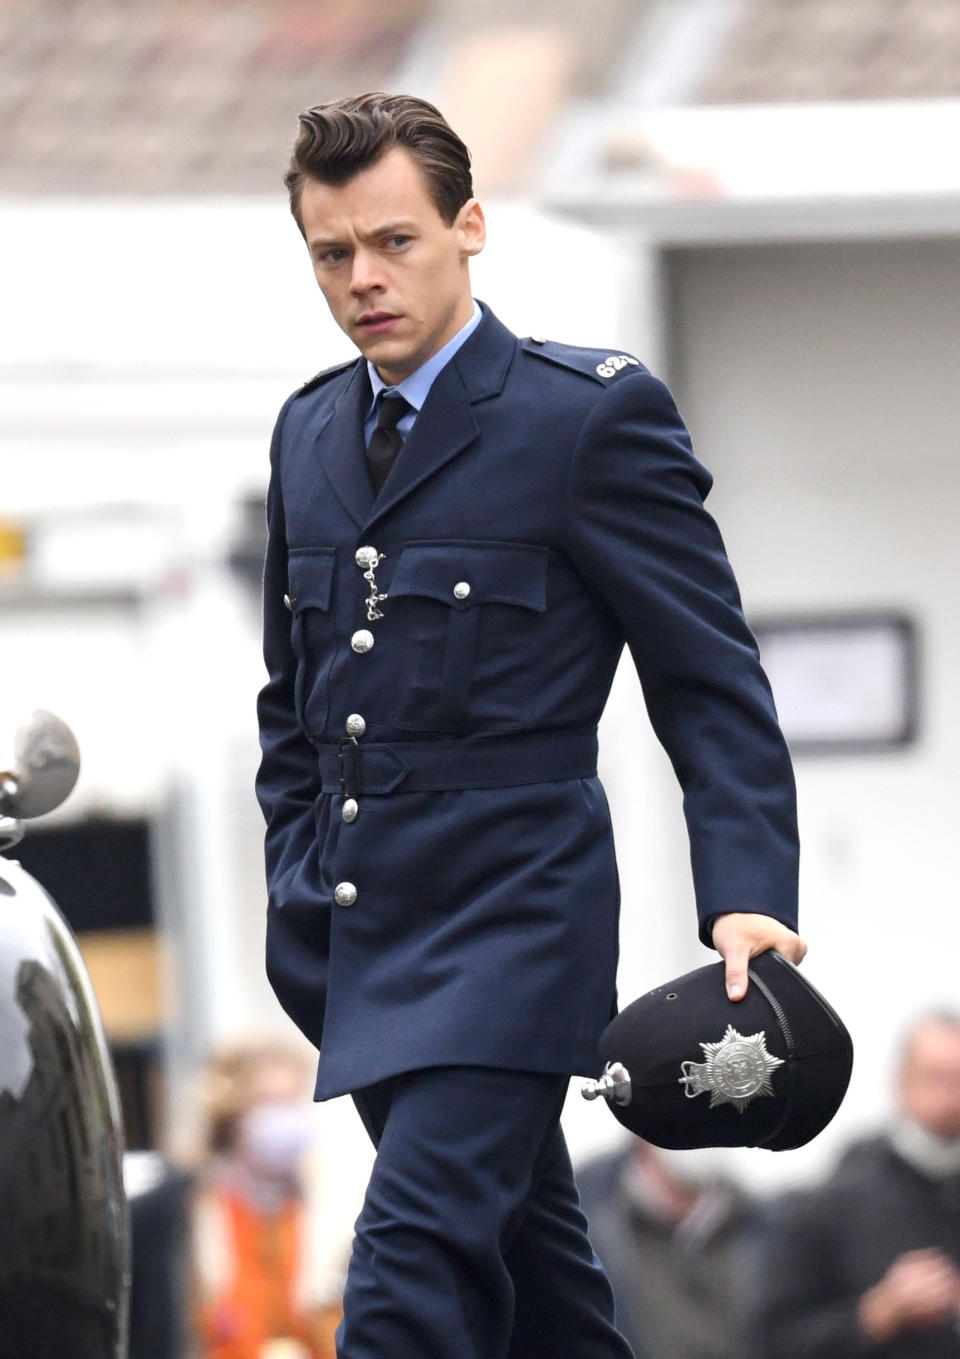 Styles on the set for "My Policeman" in 2021